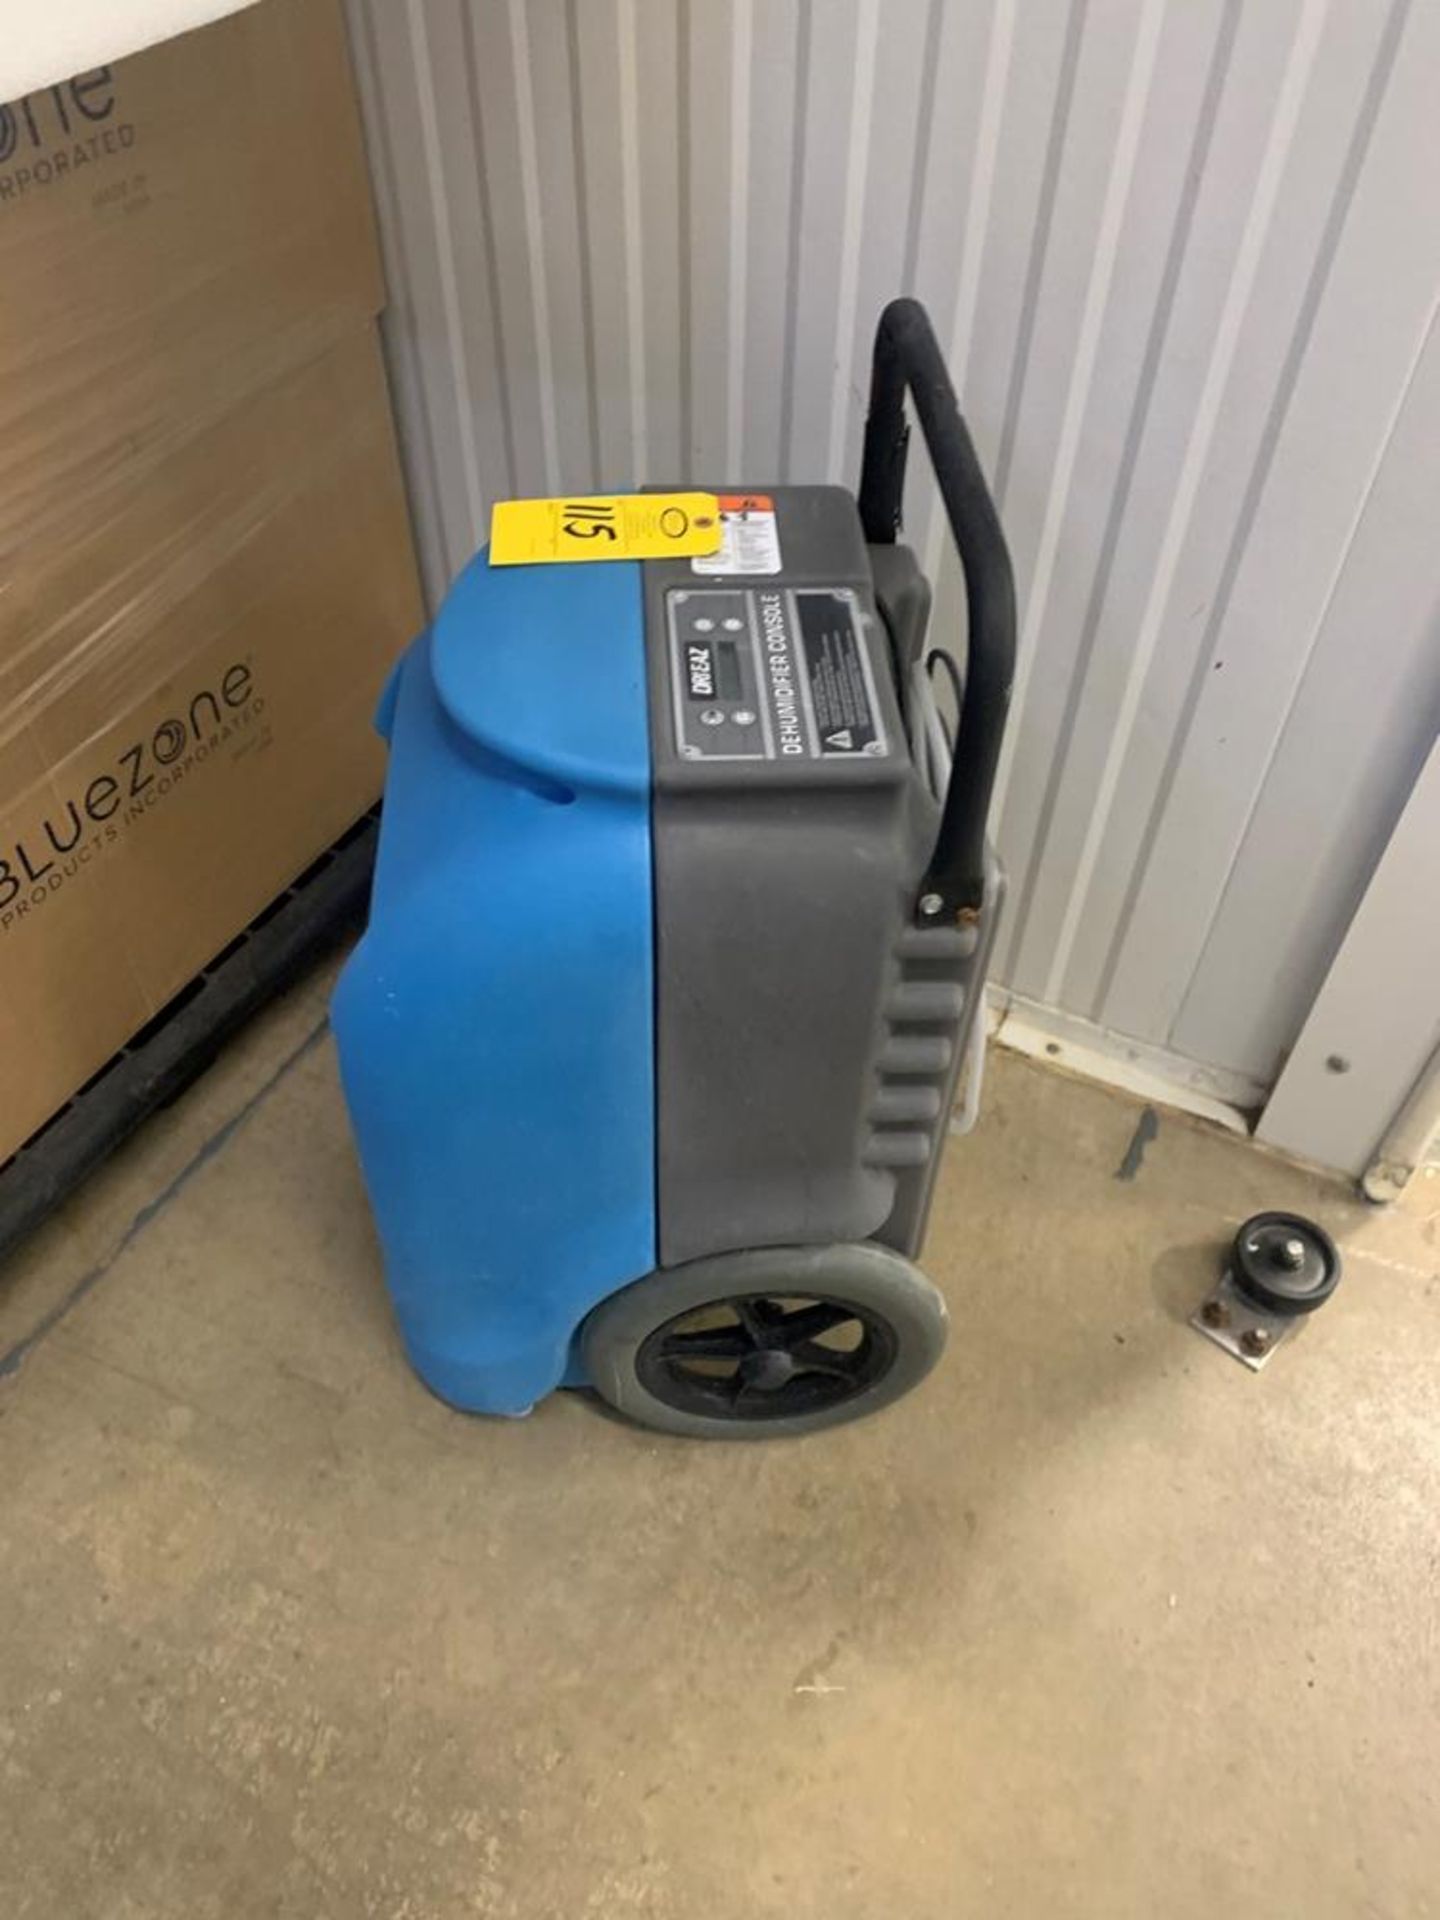 Prizair 1200 Dehumidifier, 110 volts (Required Loading Fee: $10.00) NO HAND CARRY (Price Is For - Image 2 of 4